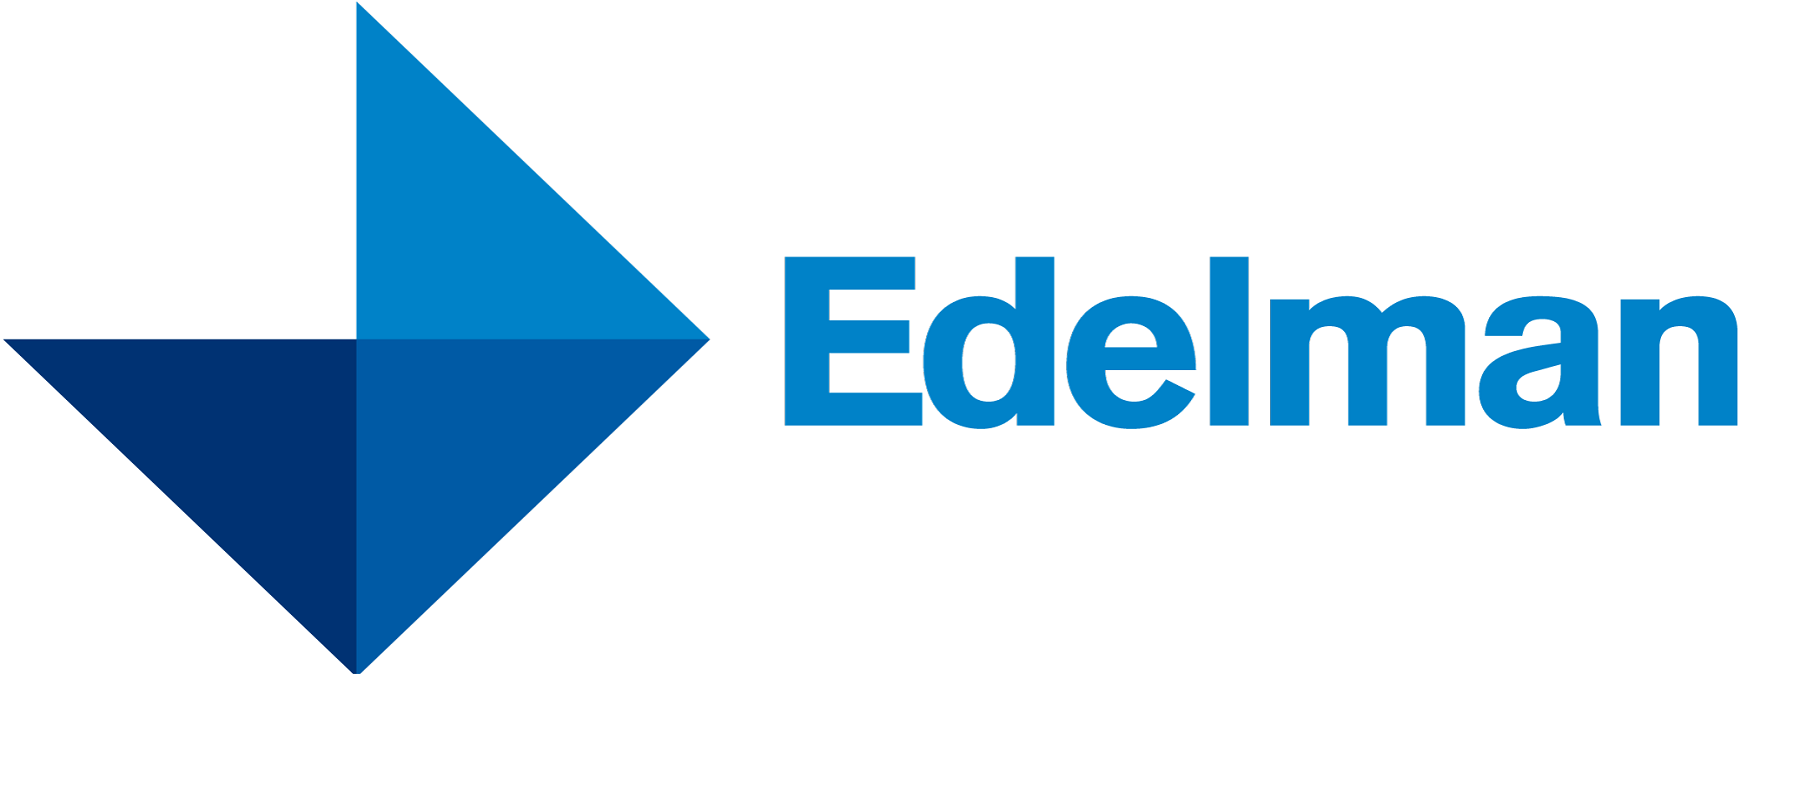 Edelman appoints global leaders for corporate, impact and crisis practices